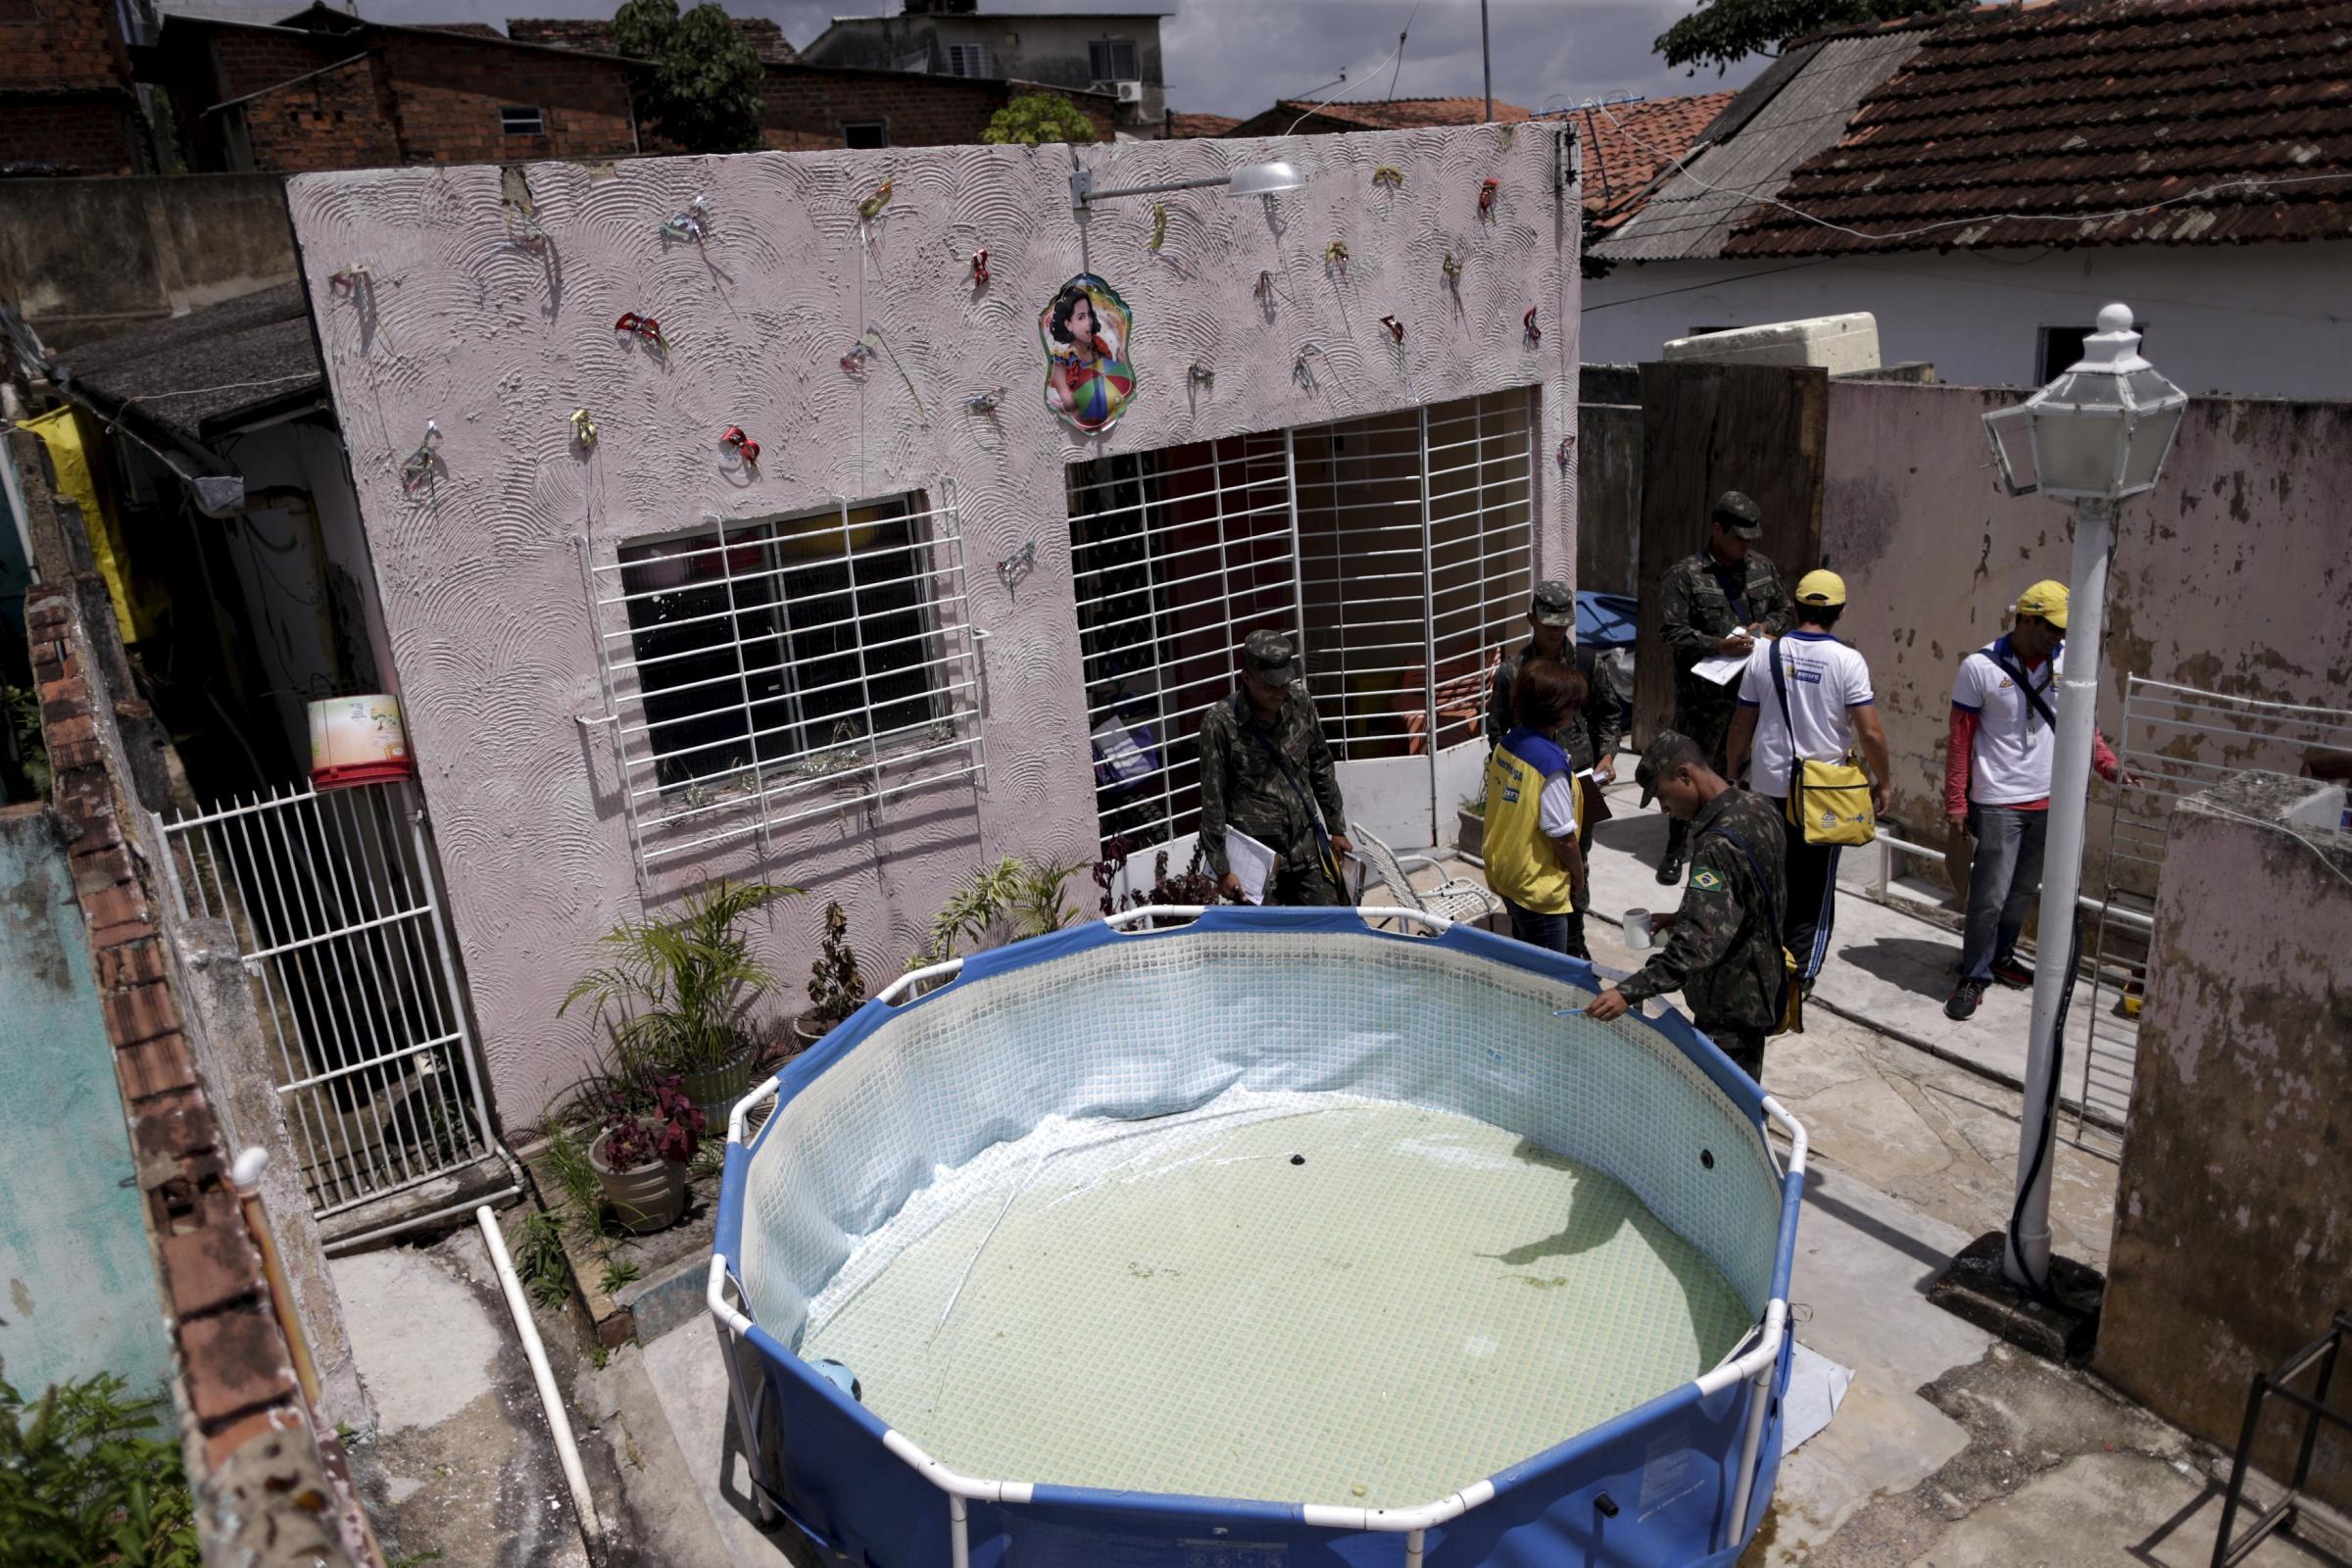 Soldiers inspect a house during an operation against the Aedes aegyti mosquito in Recife, Brazil, Jan. 27, 2016. Health authorities in the state at the center of a Zika outbreak have been overwhelmed by the surge of babies born with microcephaly, a neurological disorder associated with the mosquito-borne virus.